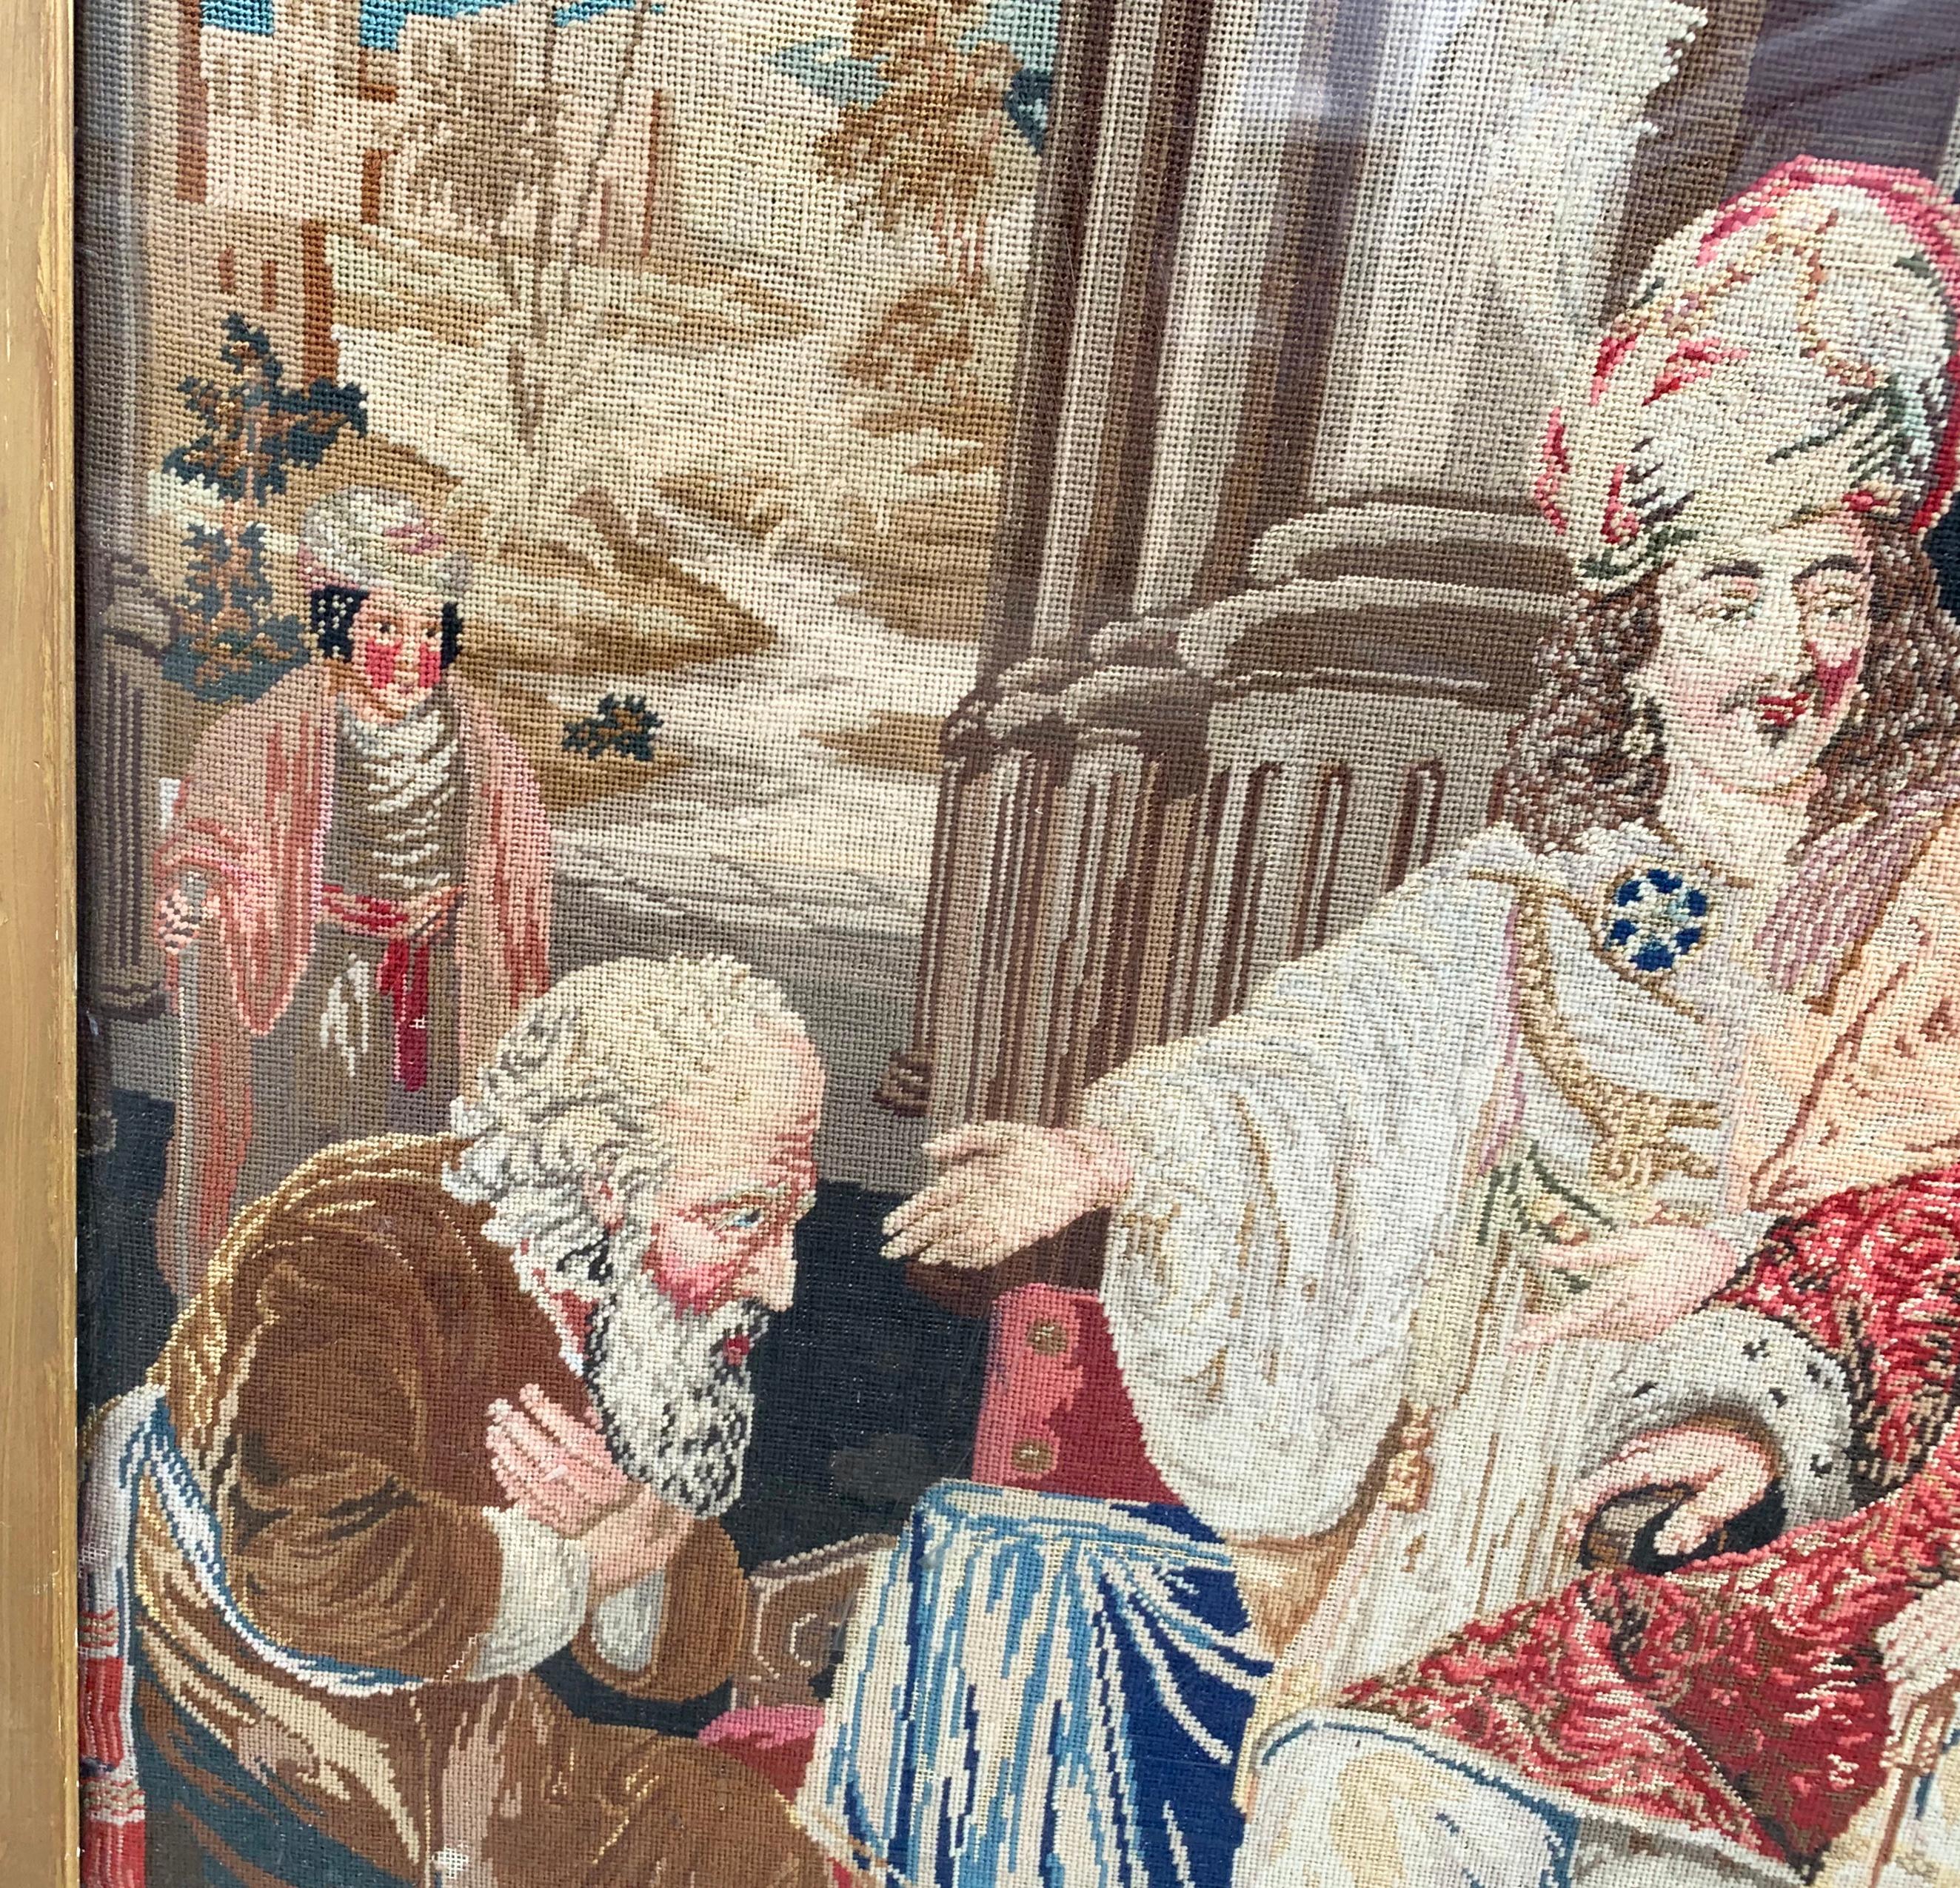 Hand-Crafted 19th Century Continental Tapestry Needlepoint Picture Of A Biblical Scene For Sale